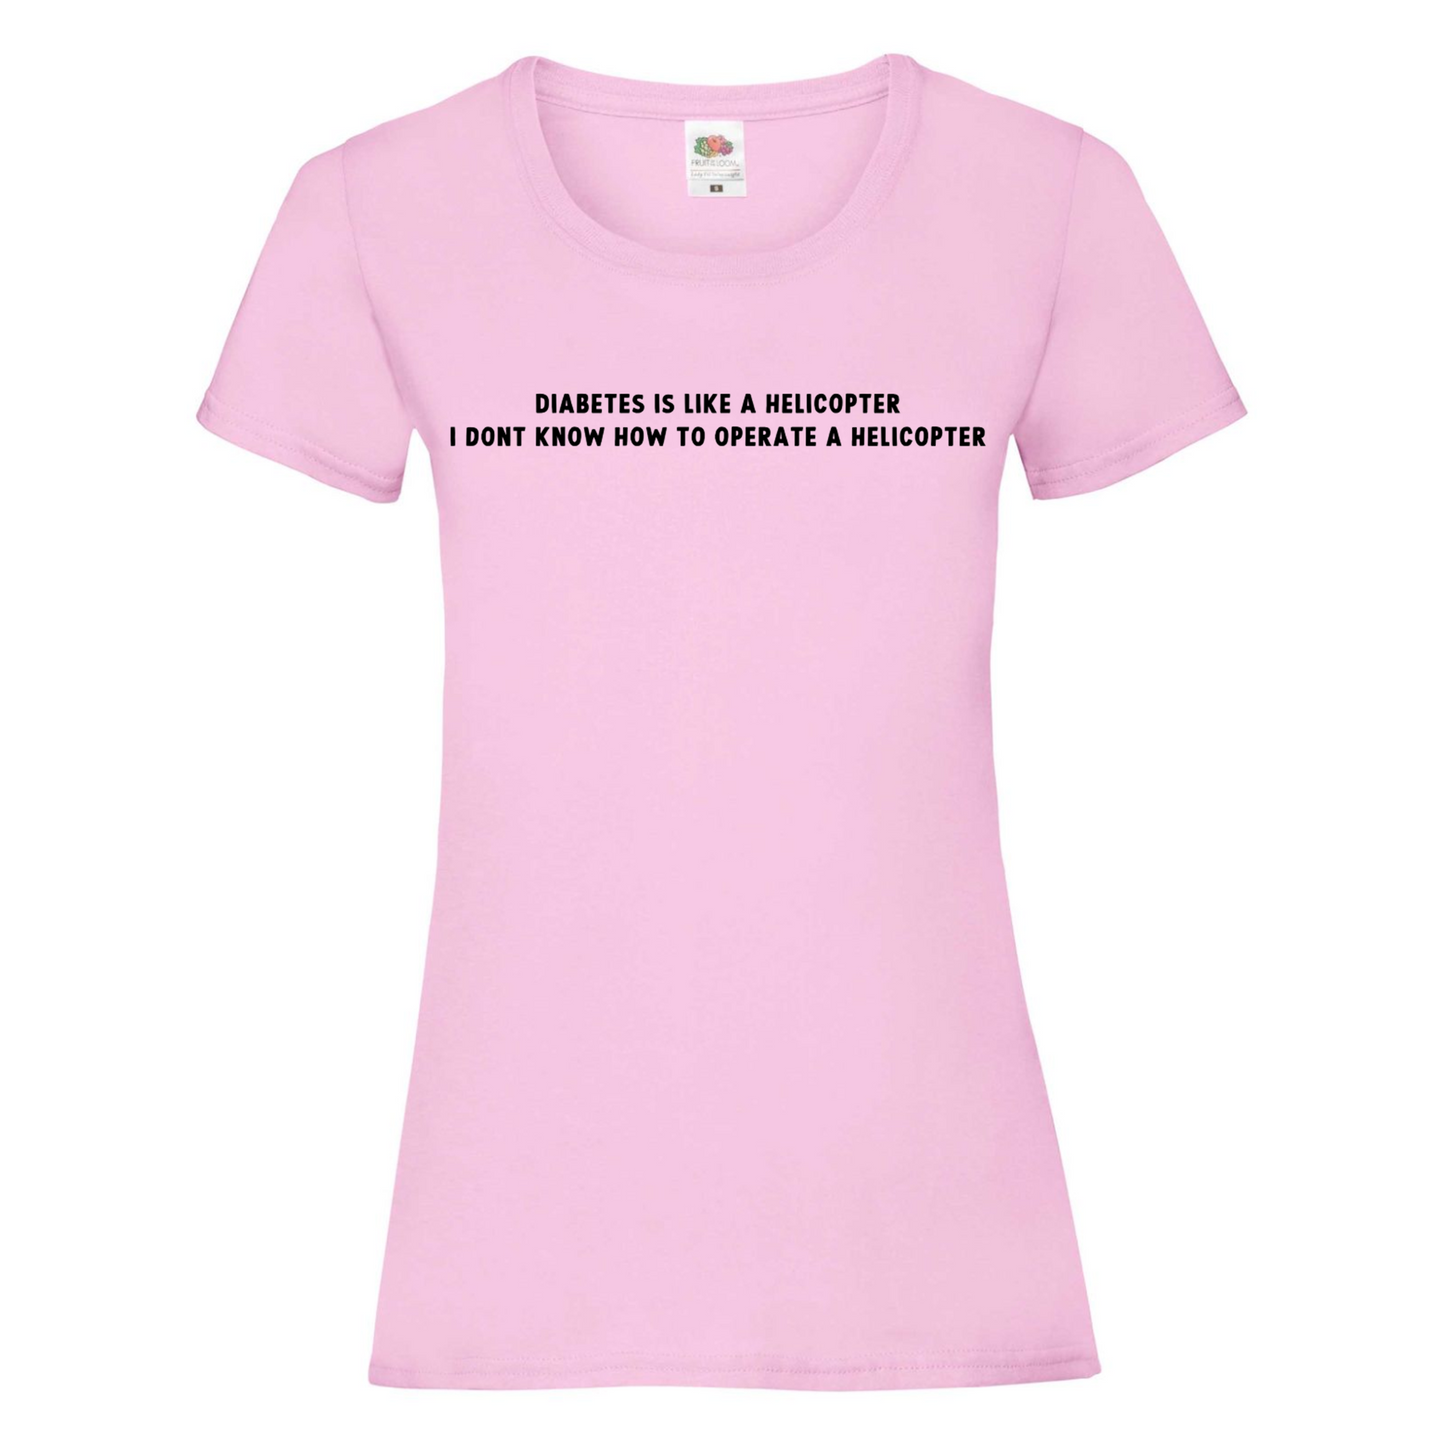 Diabetes Is Like A Helicopter, I Dont Know How To Operate A Helicopter Women's T Shirt